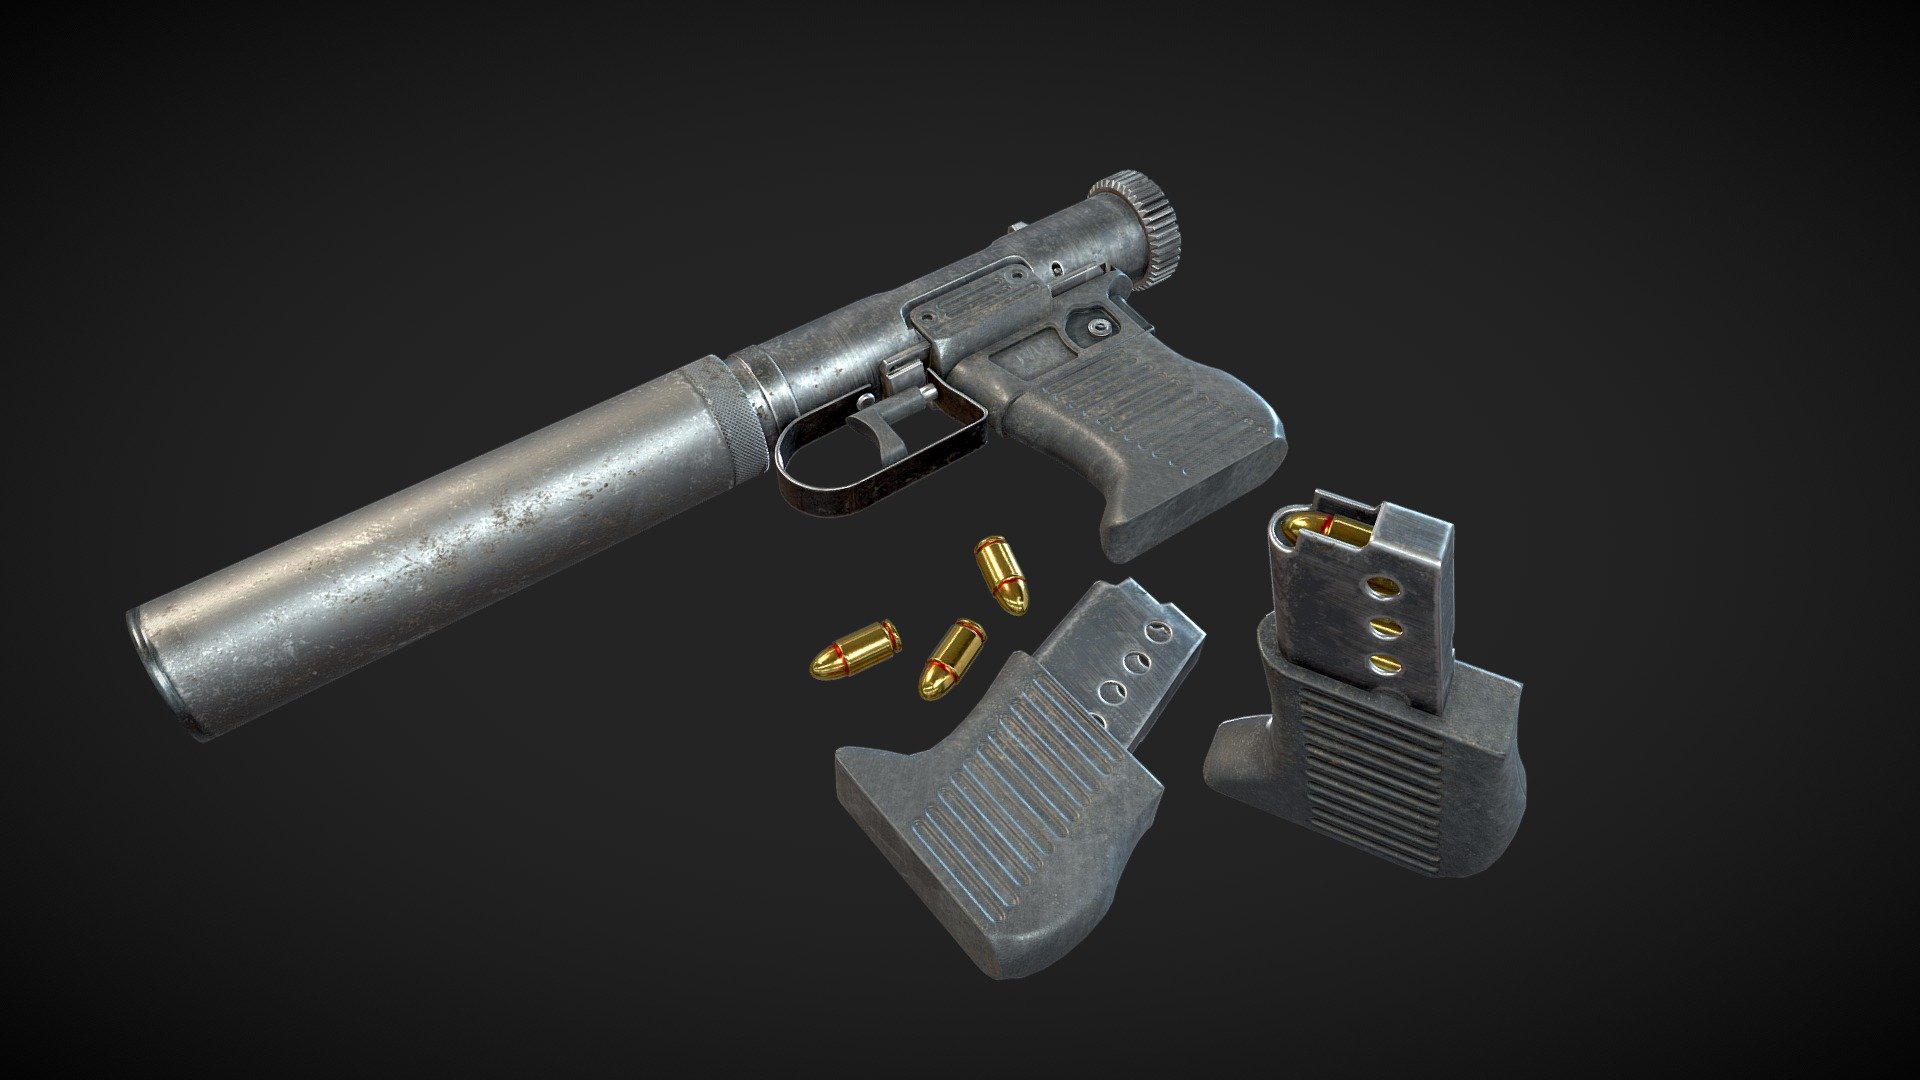 Had a lot of fun making this for the course GAP!
Modelled in 3DS Max and textured in Substance Painter 3d model